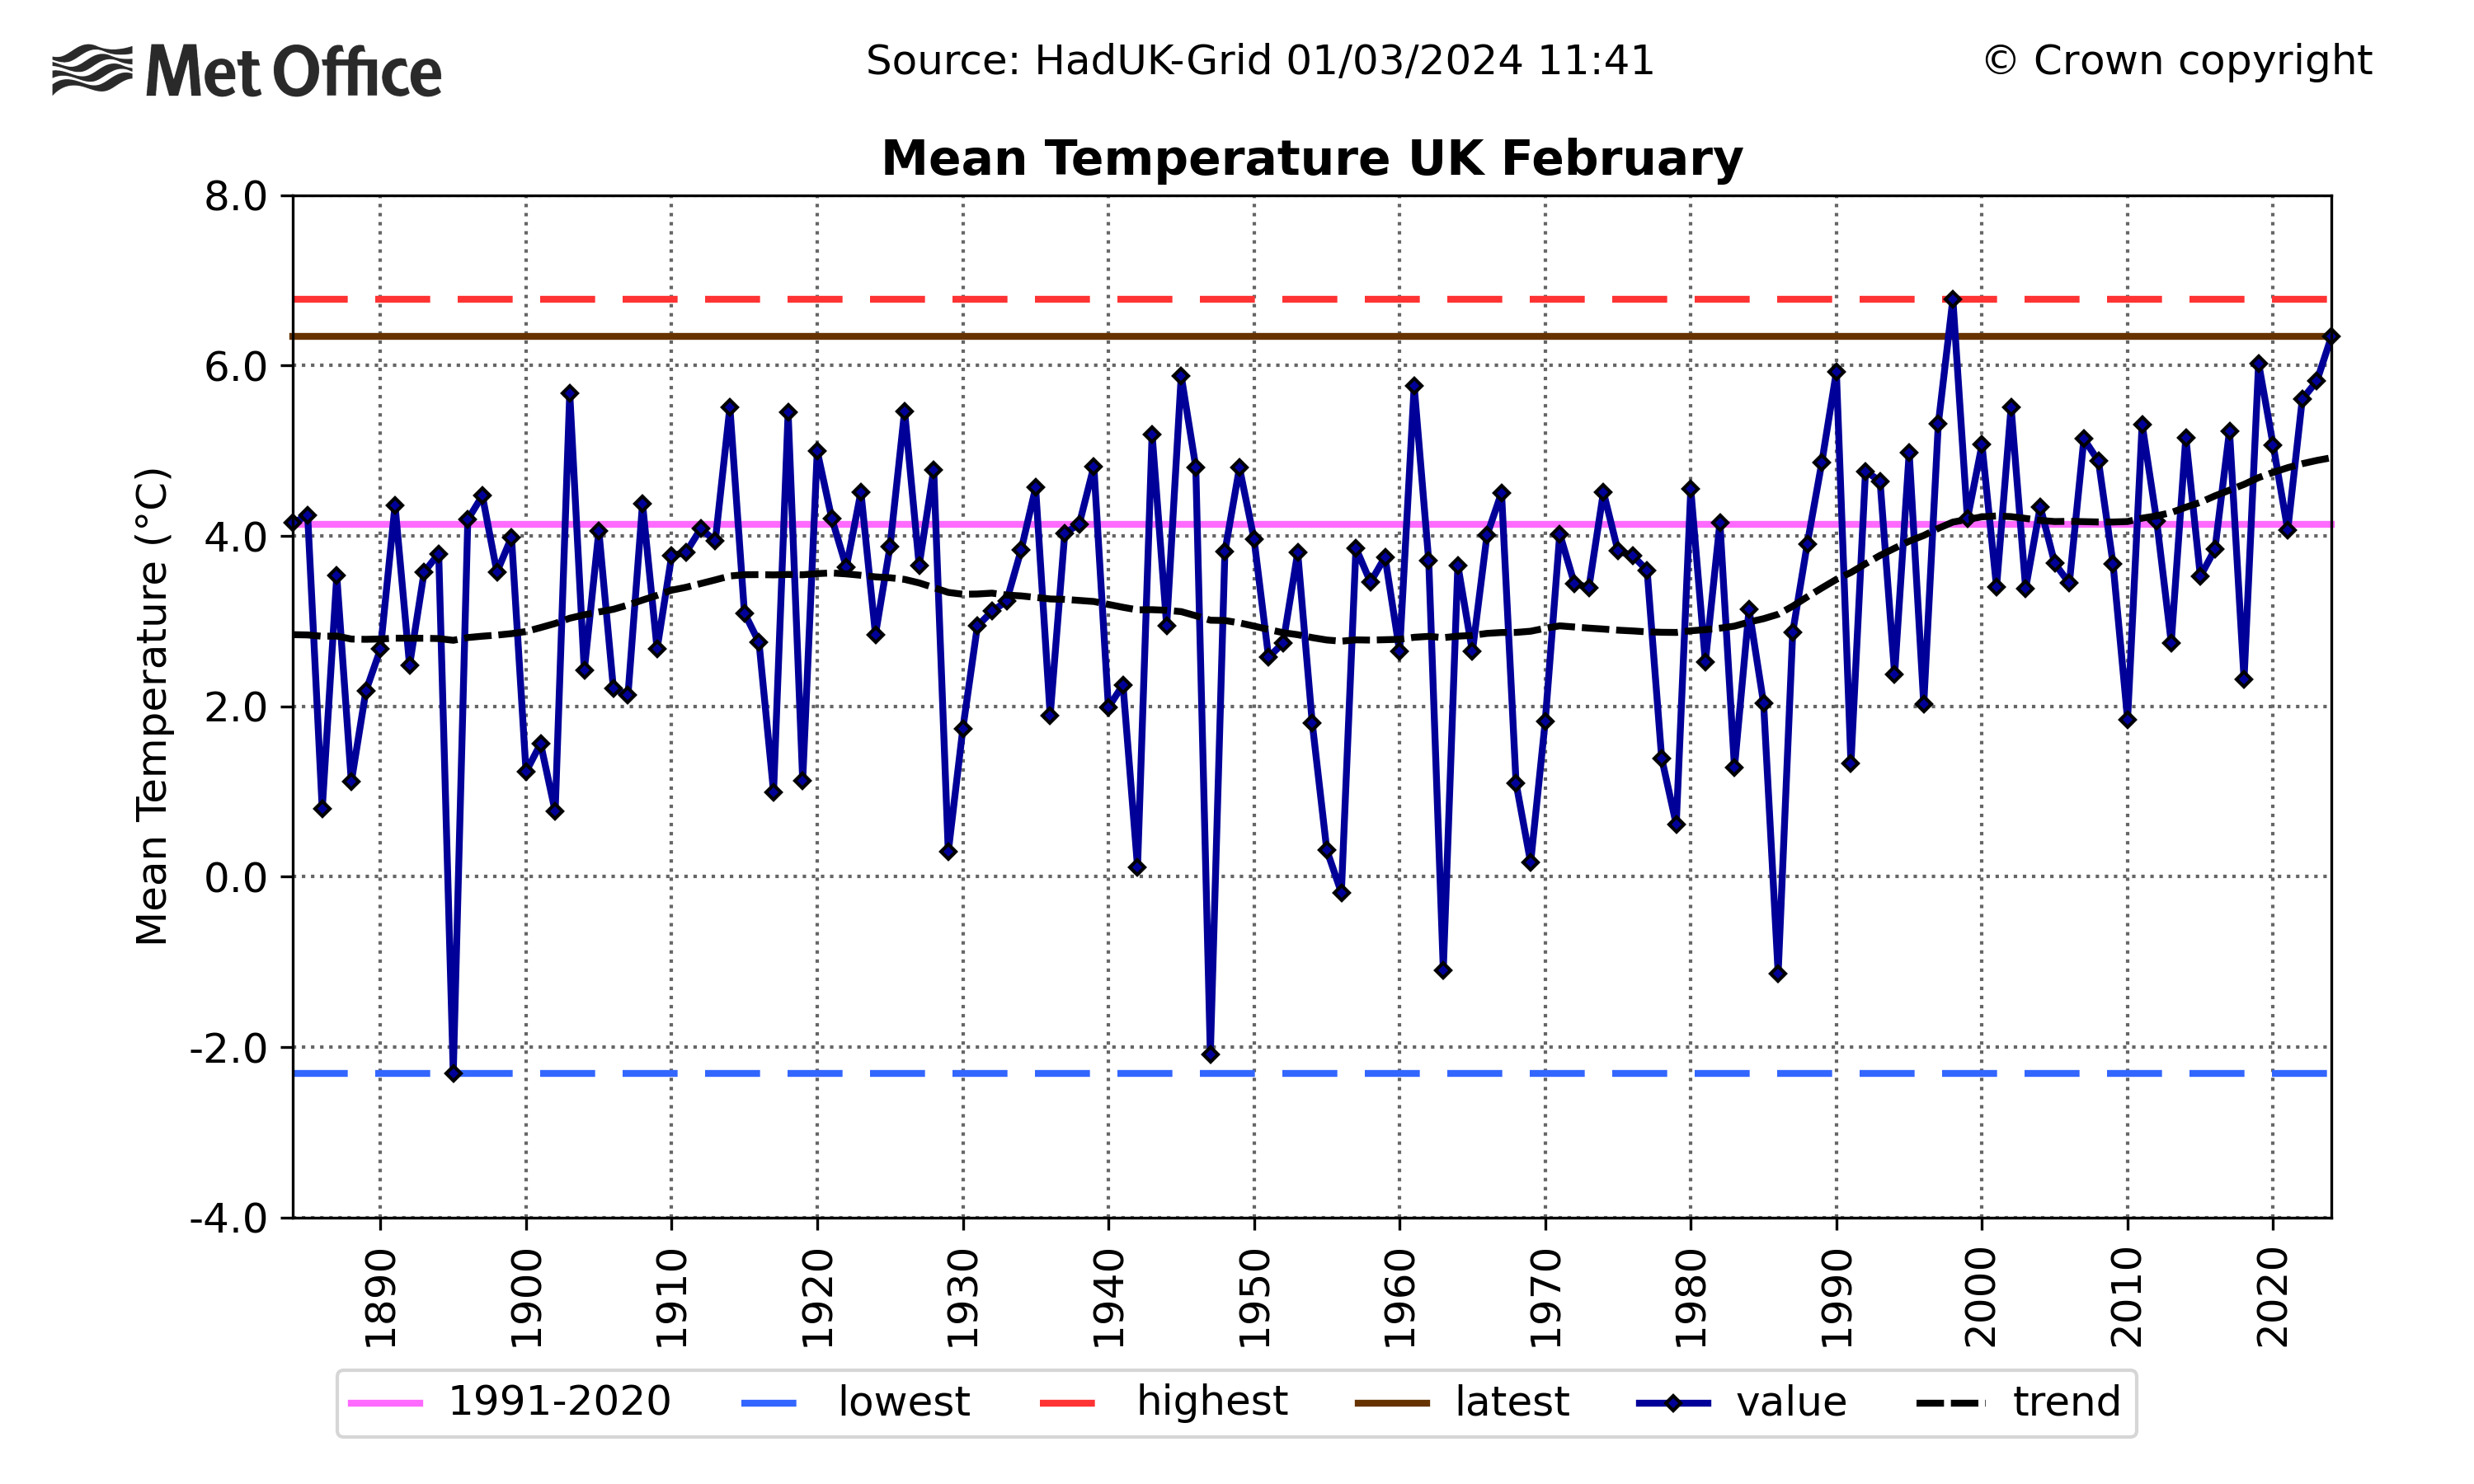 Graph showing February's mean temperature for the UK over time. The graph shows year-to-year variability but a warming trend.